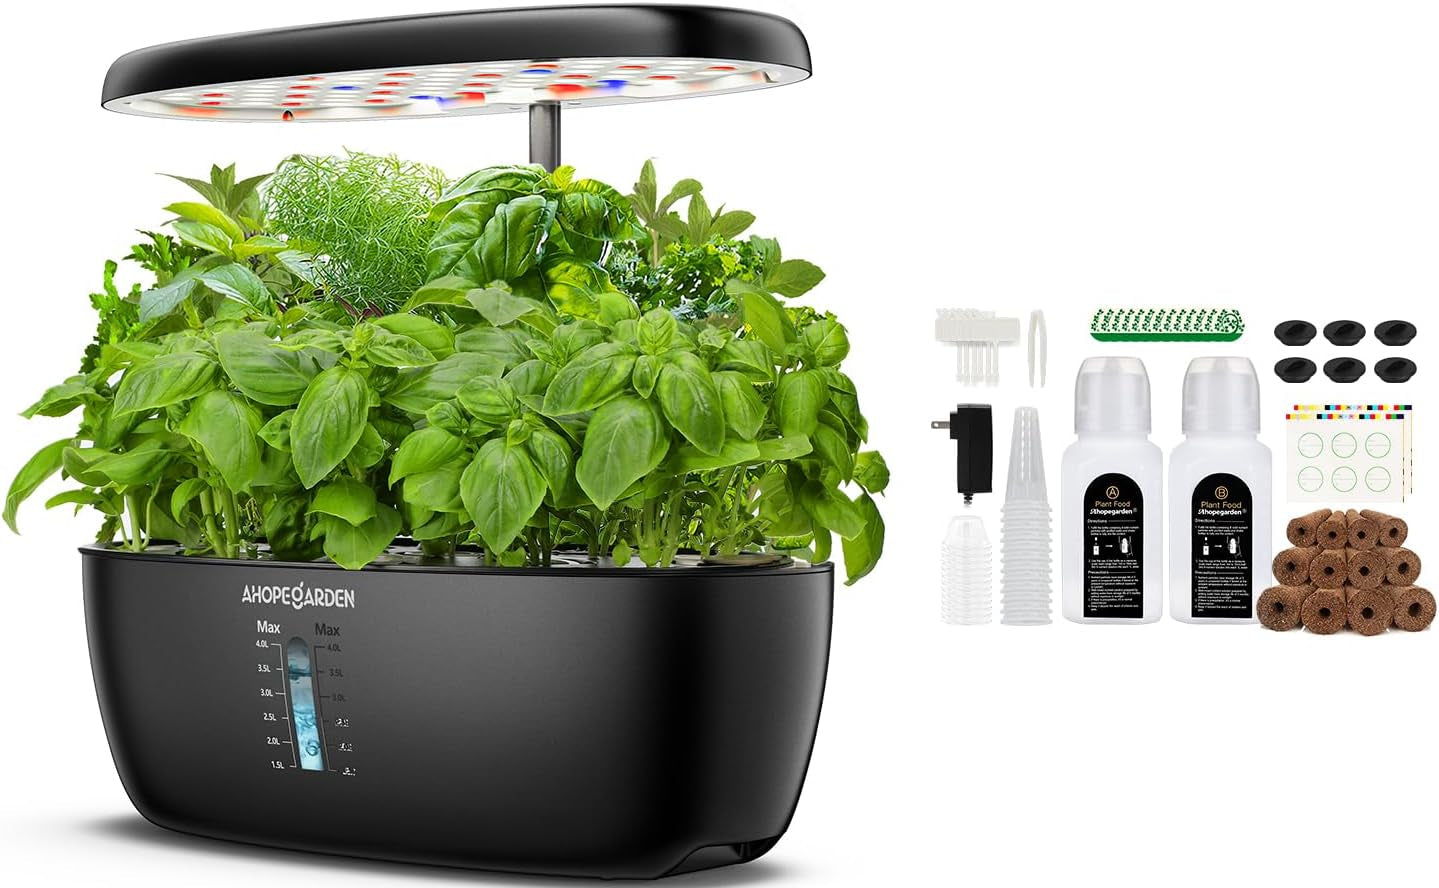 Hydroponics Growing System Garden Kit : 12 Pods Plant Germination Kit Herb Indoor Garden Growth Lamp Countertop with LED Grow Light Hydroponic Planter Grower Harvest Vegetable Lettuce Black